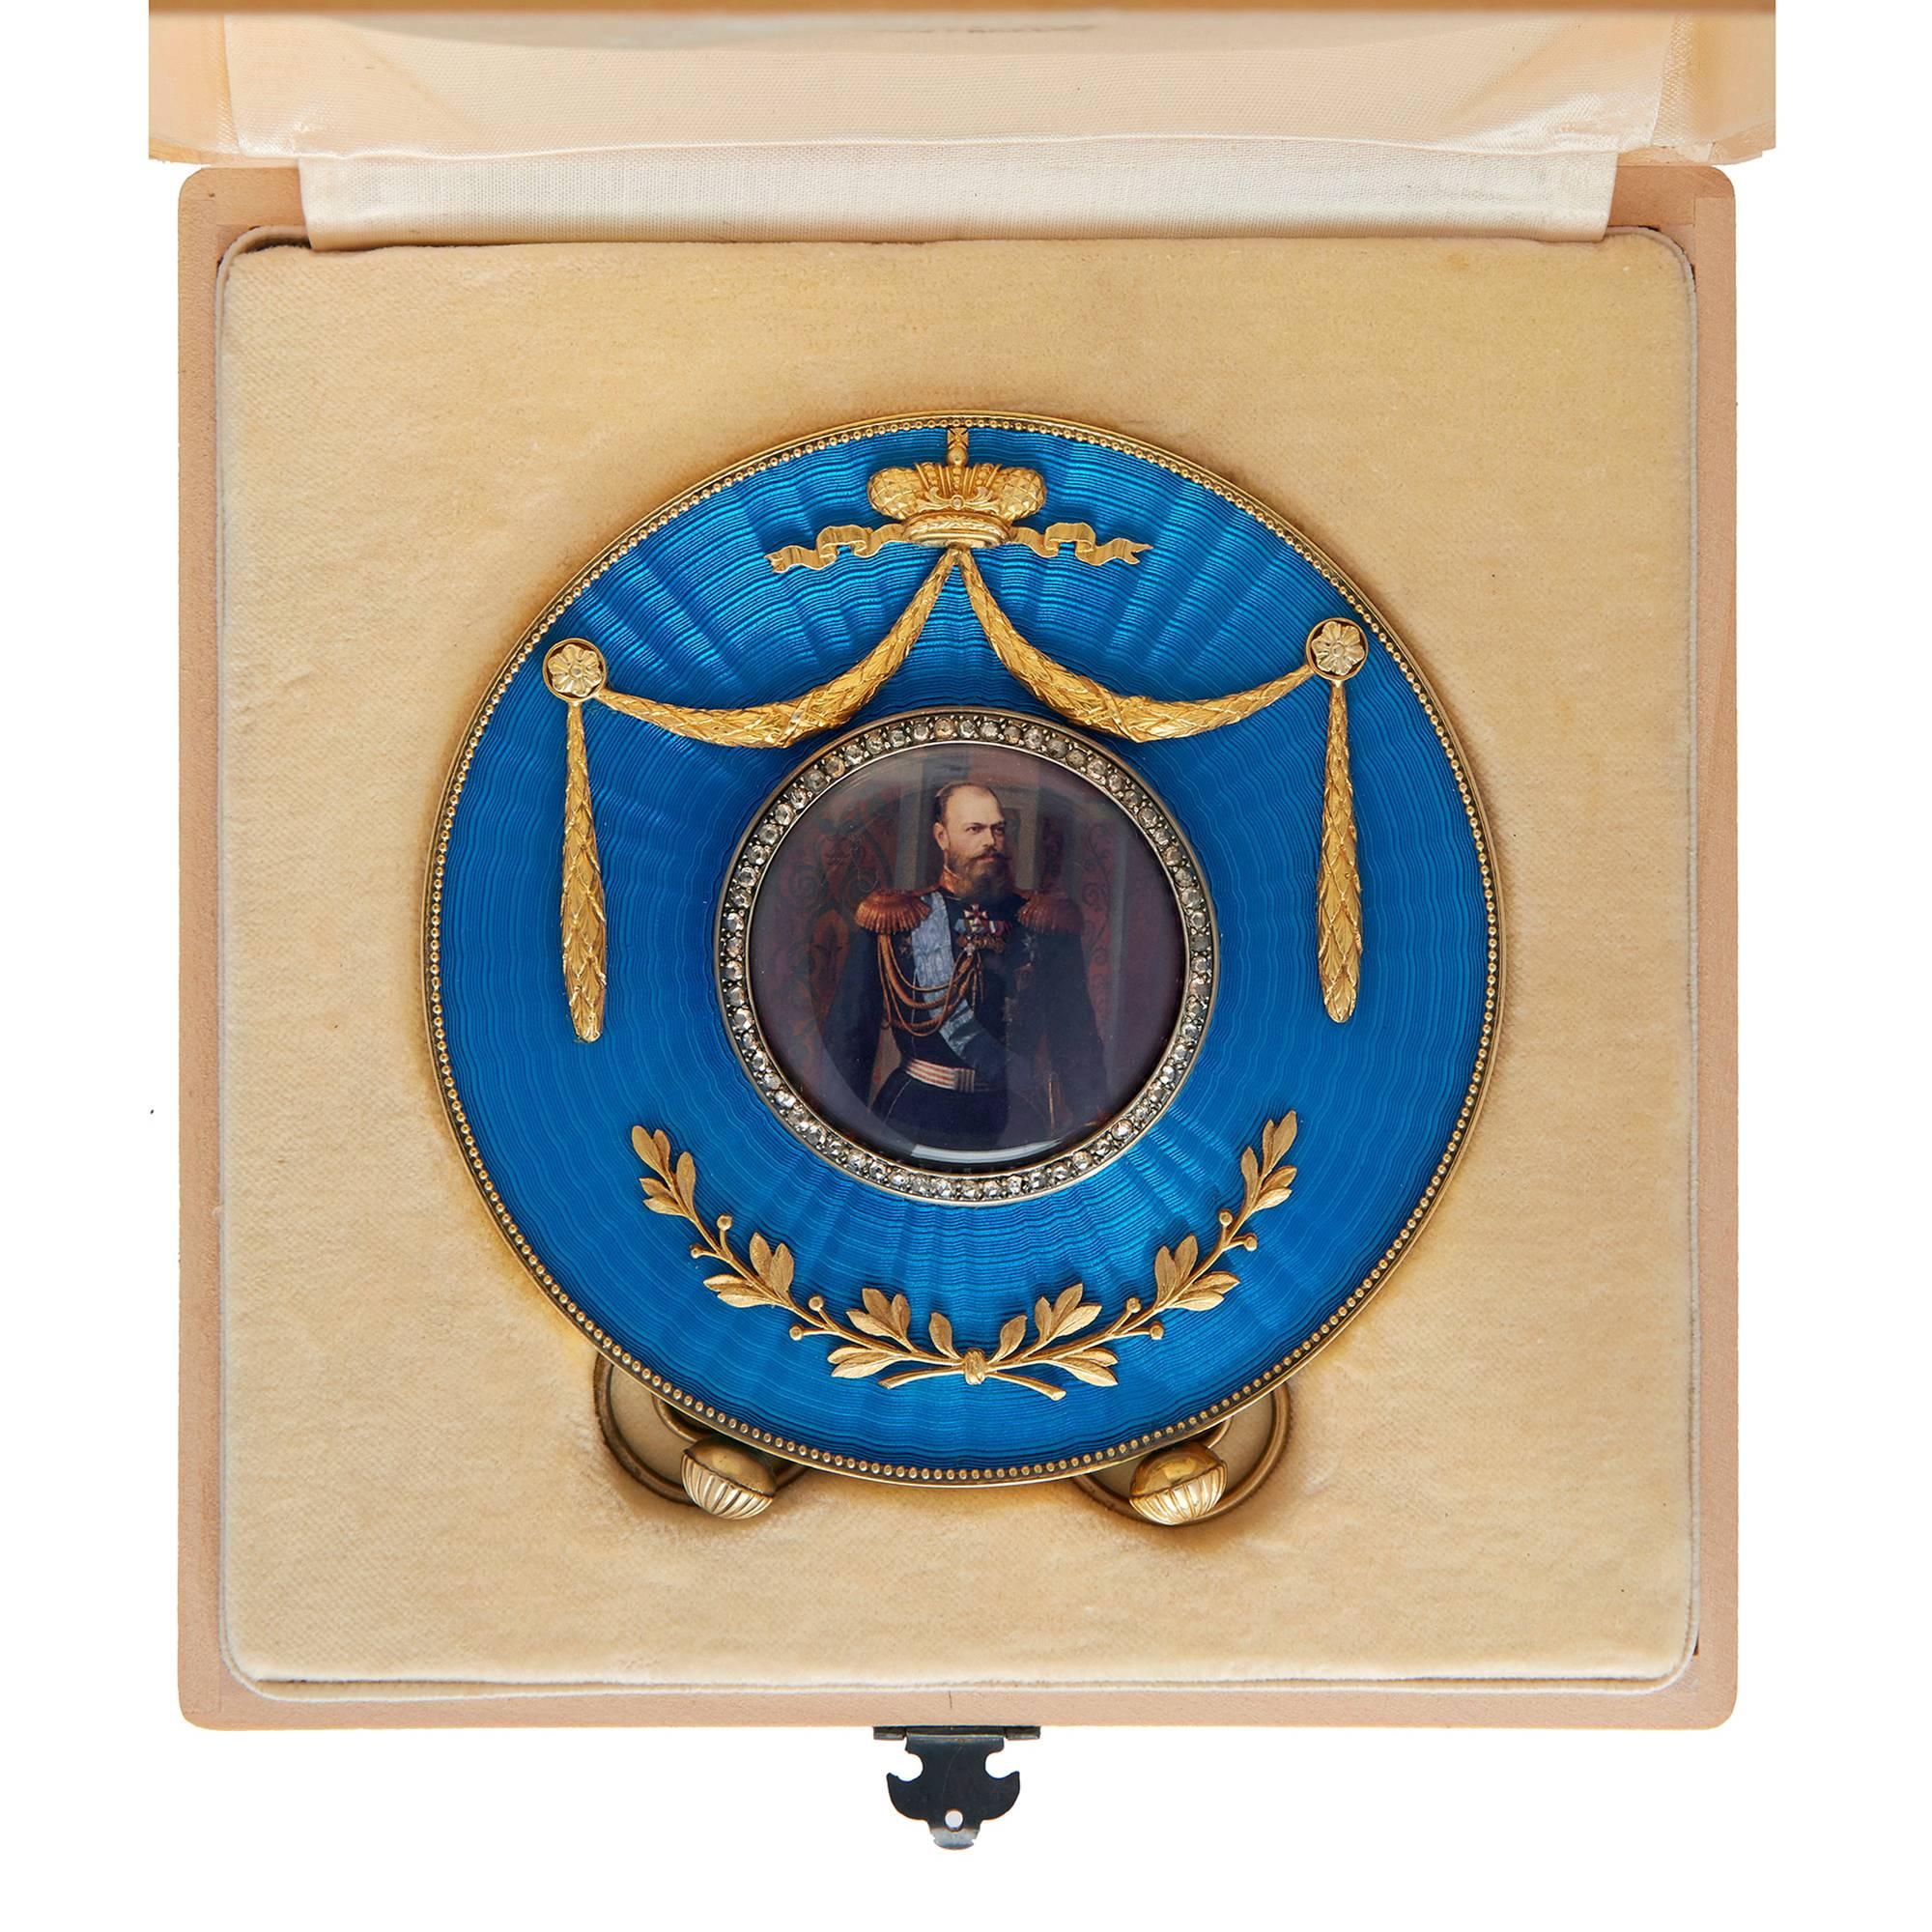 The central circular photograph surrounded by a band of diamonds, set on a circular blue guilloché enamel panel surmounted by a crown and with floral decoration within a silver gilt border and easel backing, with spurious hallmarks and fitted wooden